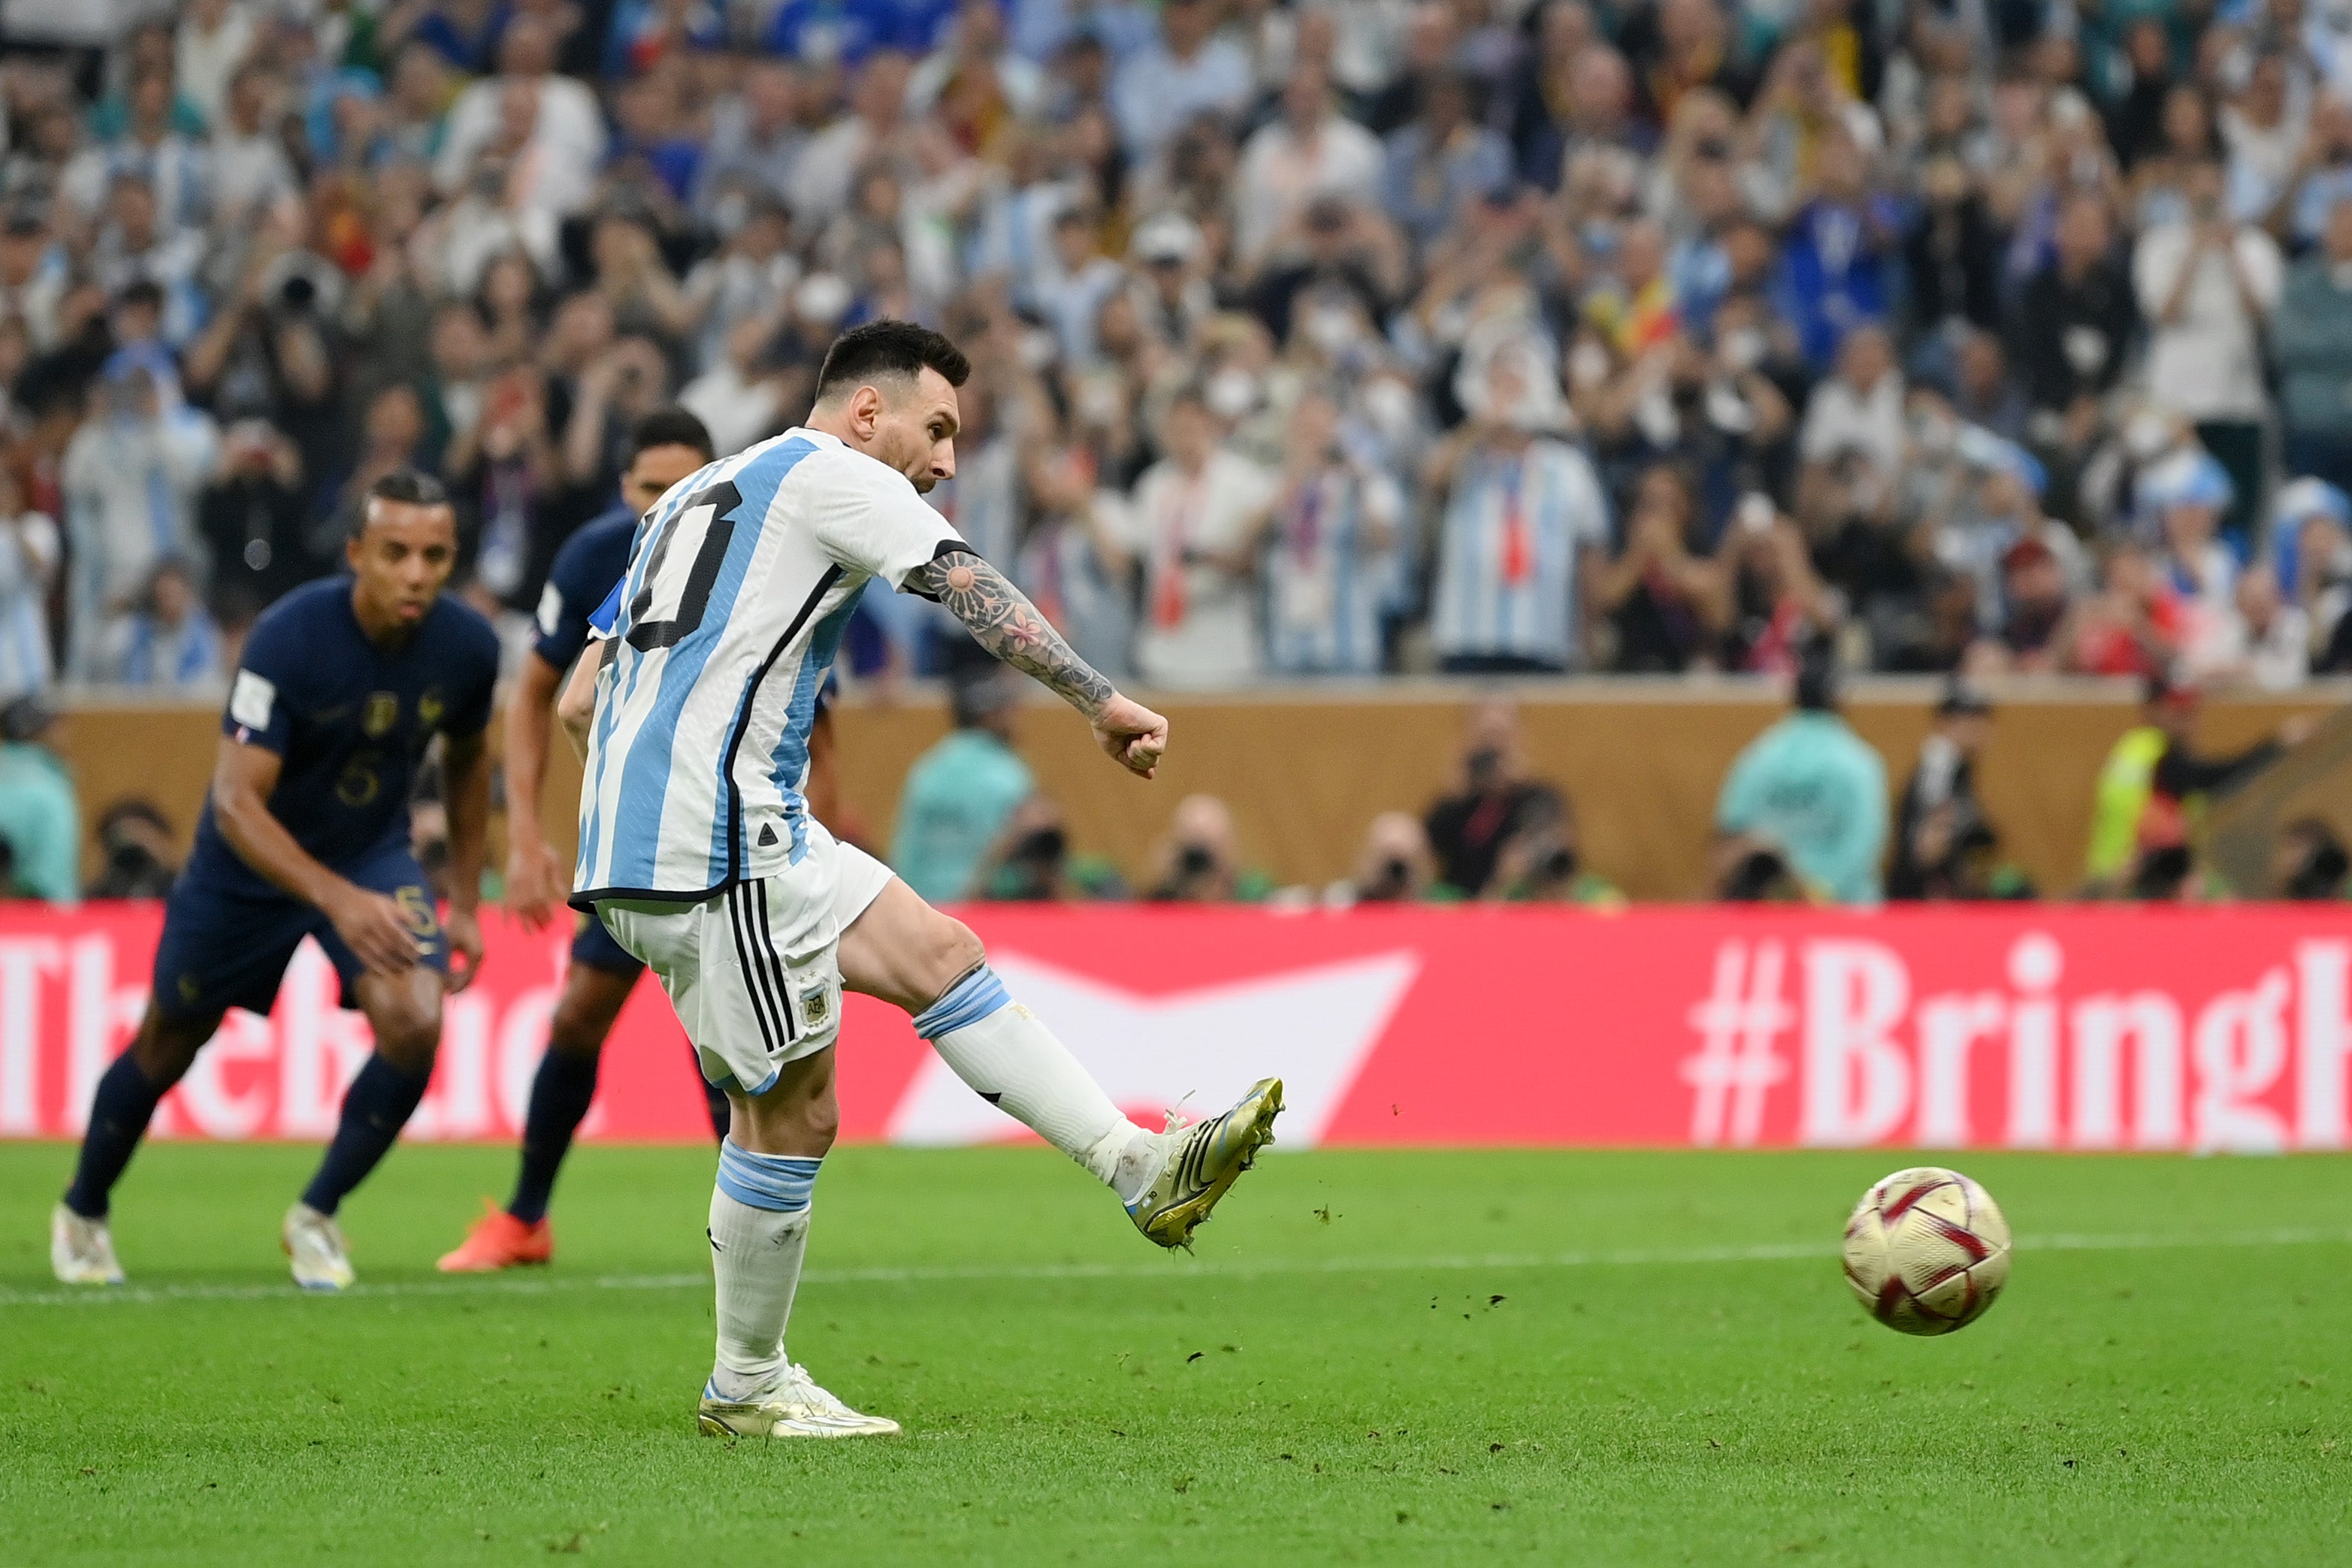 Lionel Messi opens the scoring in the 2022 World Cup final, netting a penalty